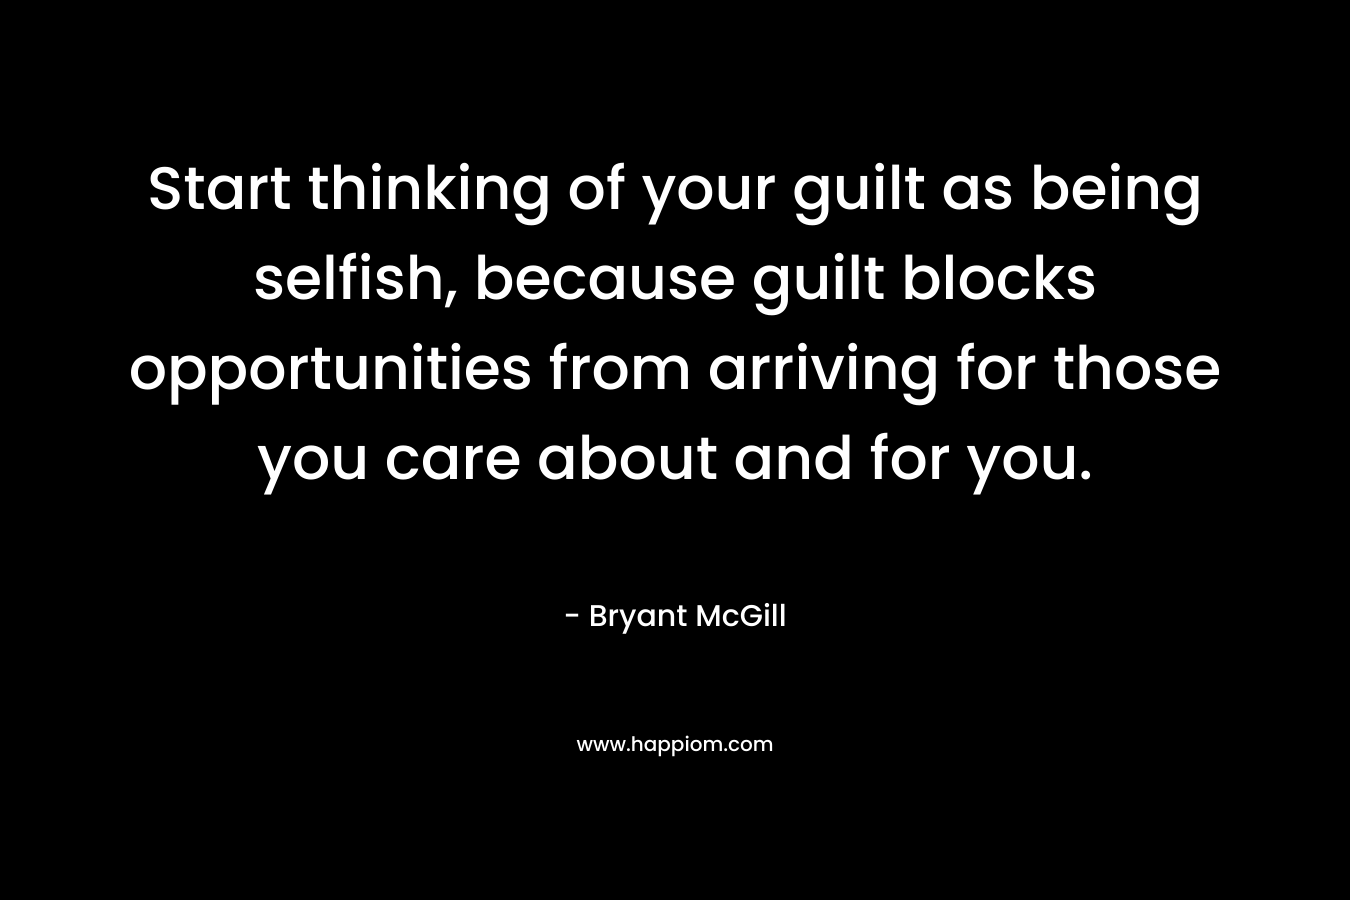 Start thinking of your guilt as being selfish, because guilt blocks opportunities from arriving for those you care about and for you.